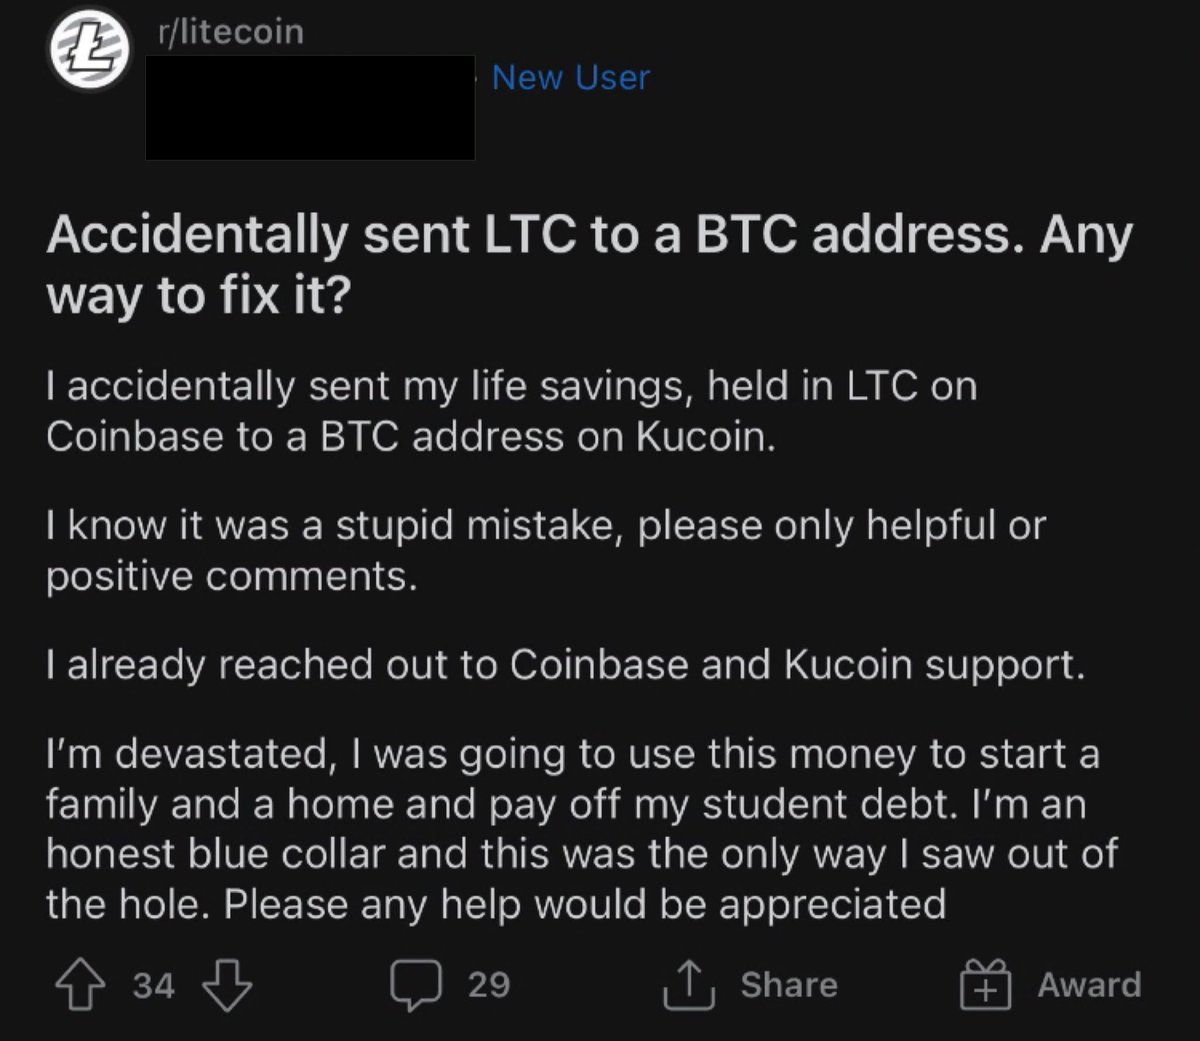 Crypto Bros Posting L's - screenshot - 43 rlitecoin New User Accidentally sent Ltc to a Btc address. Any way to fix it? I accidentally sent my life savings, held in Ltc on Coinbase to a Btc address on Kucoin. I know it was a stupid mistake, please only he